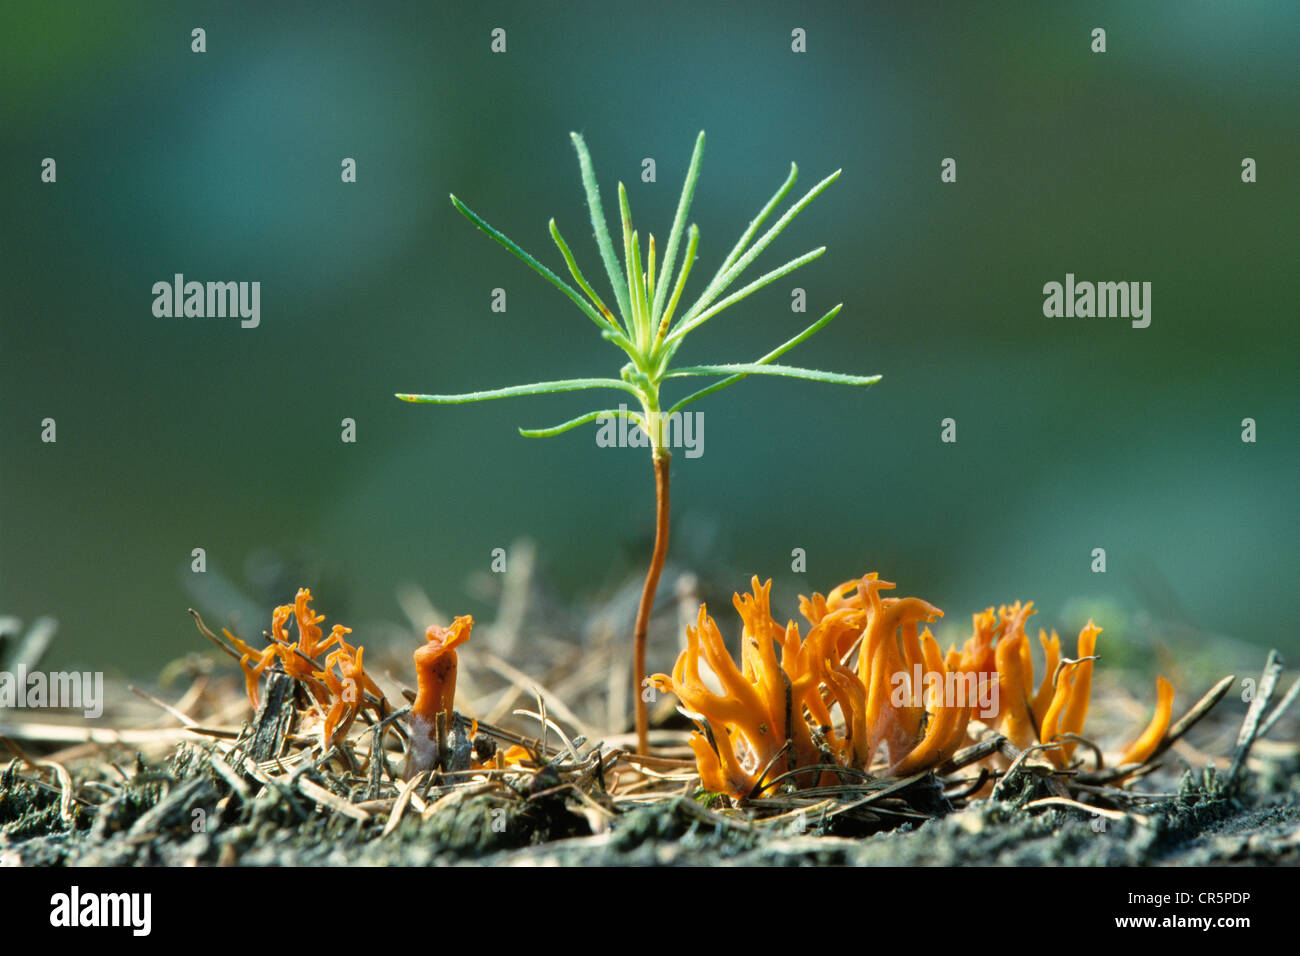 Seedling of Scots Pine (Pinus sylvestris) and Yellow Stagshorn Fungus (Calocera viscosa), Thuringia, Germany, Europe Stock Photo